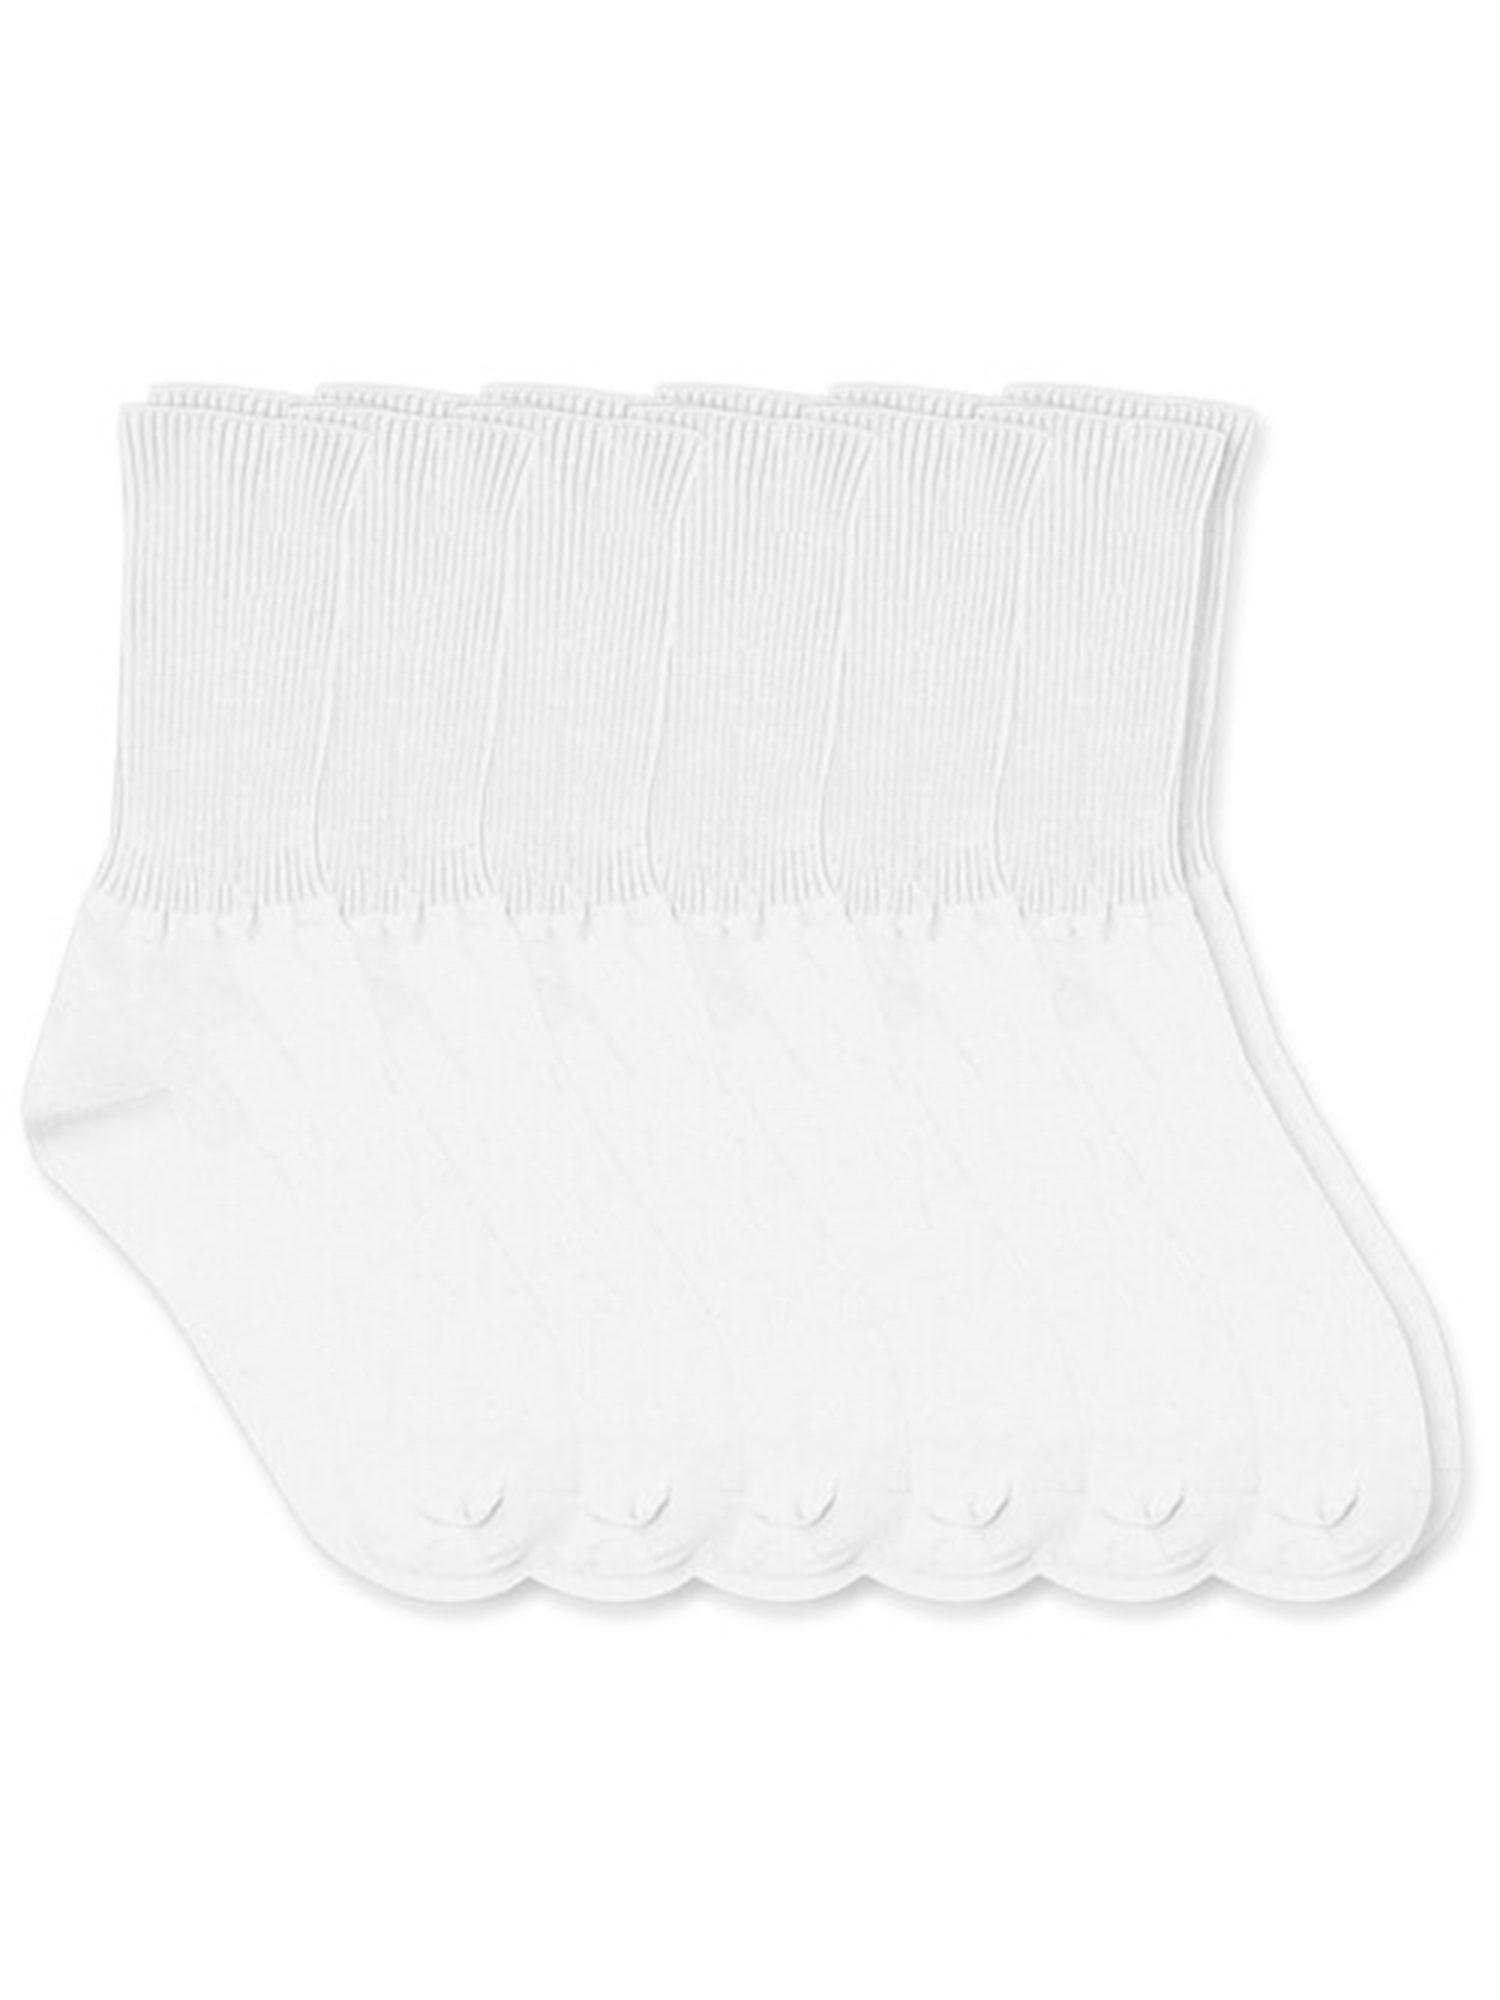 Jefferies Socks Boys Socks, 6 Pack School Uniform Smooth Toe Ribbed Cotton Crew Sizes Toddler and XS - L - image 1 of 2